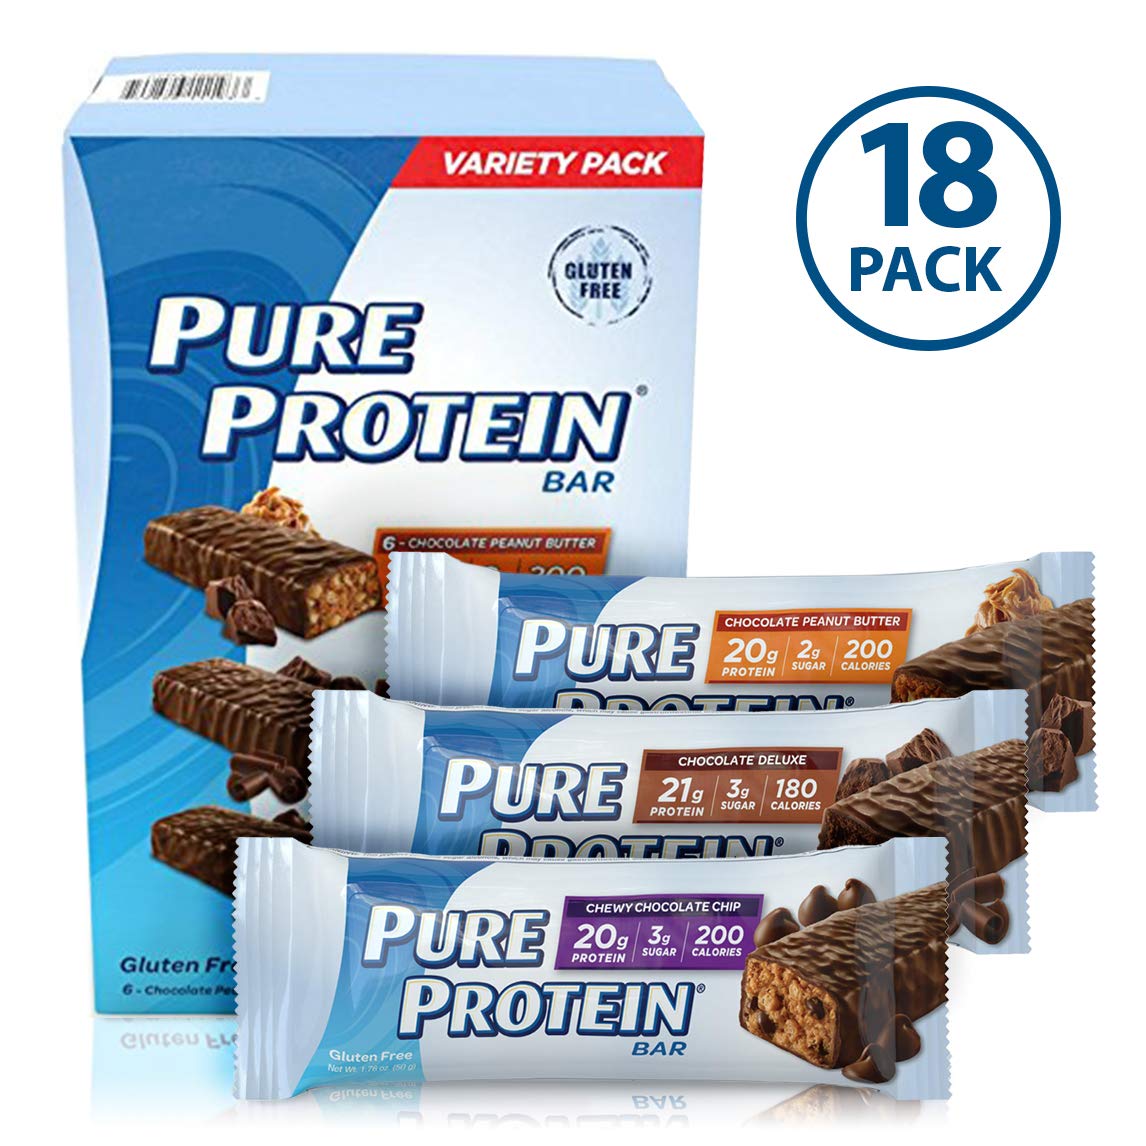 Pure Protein Bars Variety Pack Review | WalkJogRUn